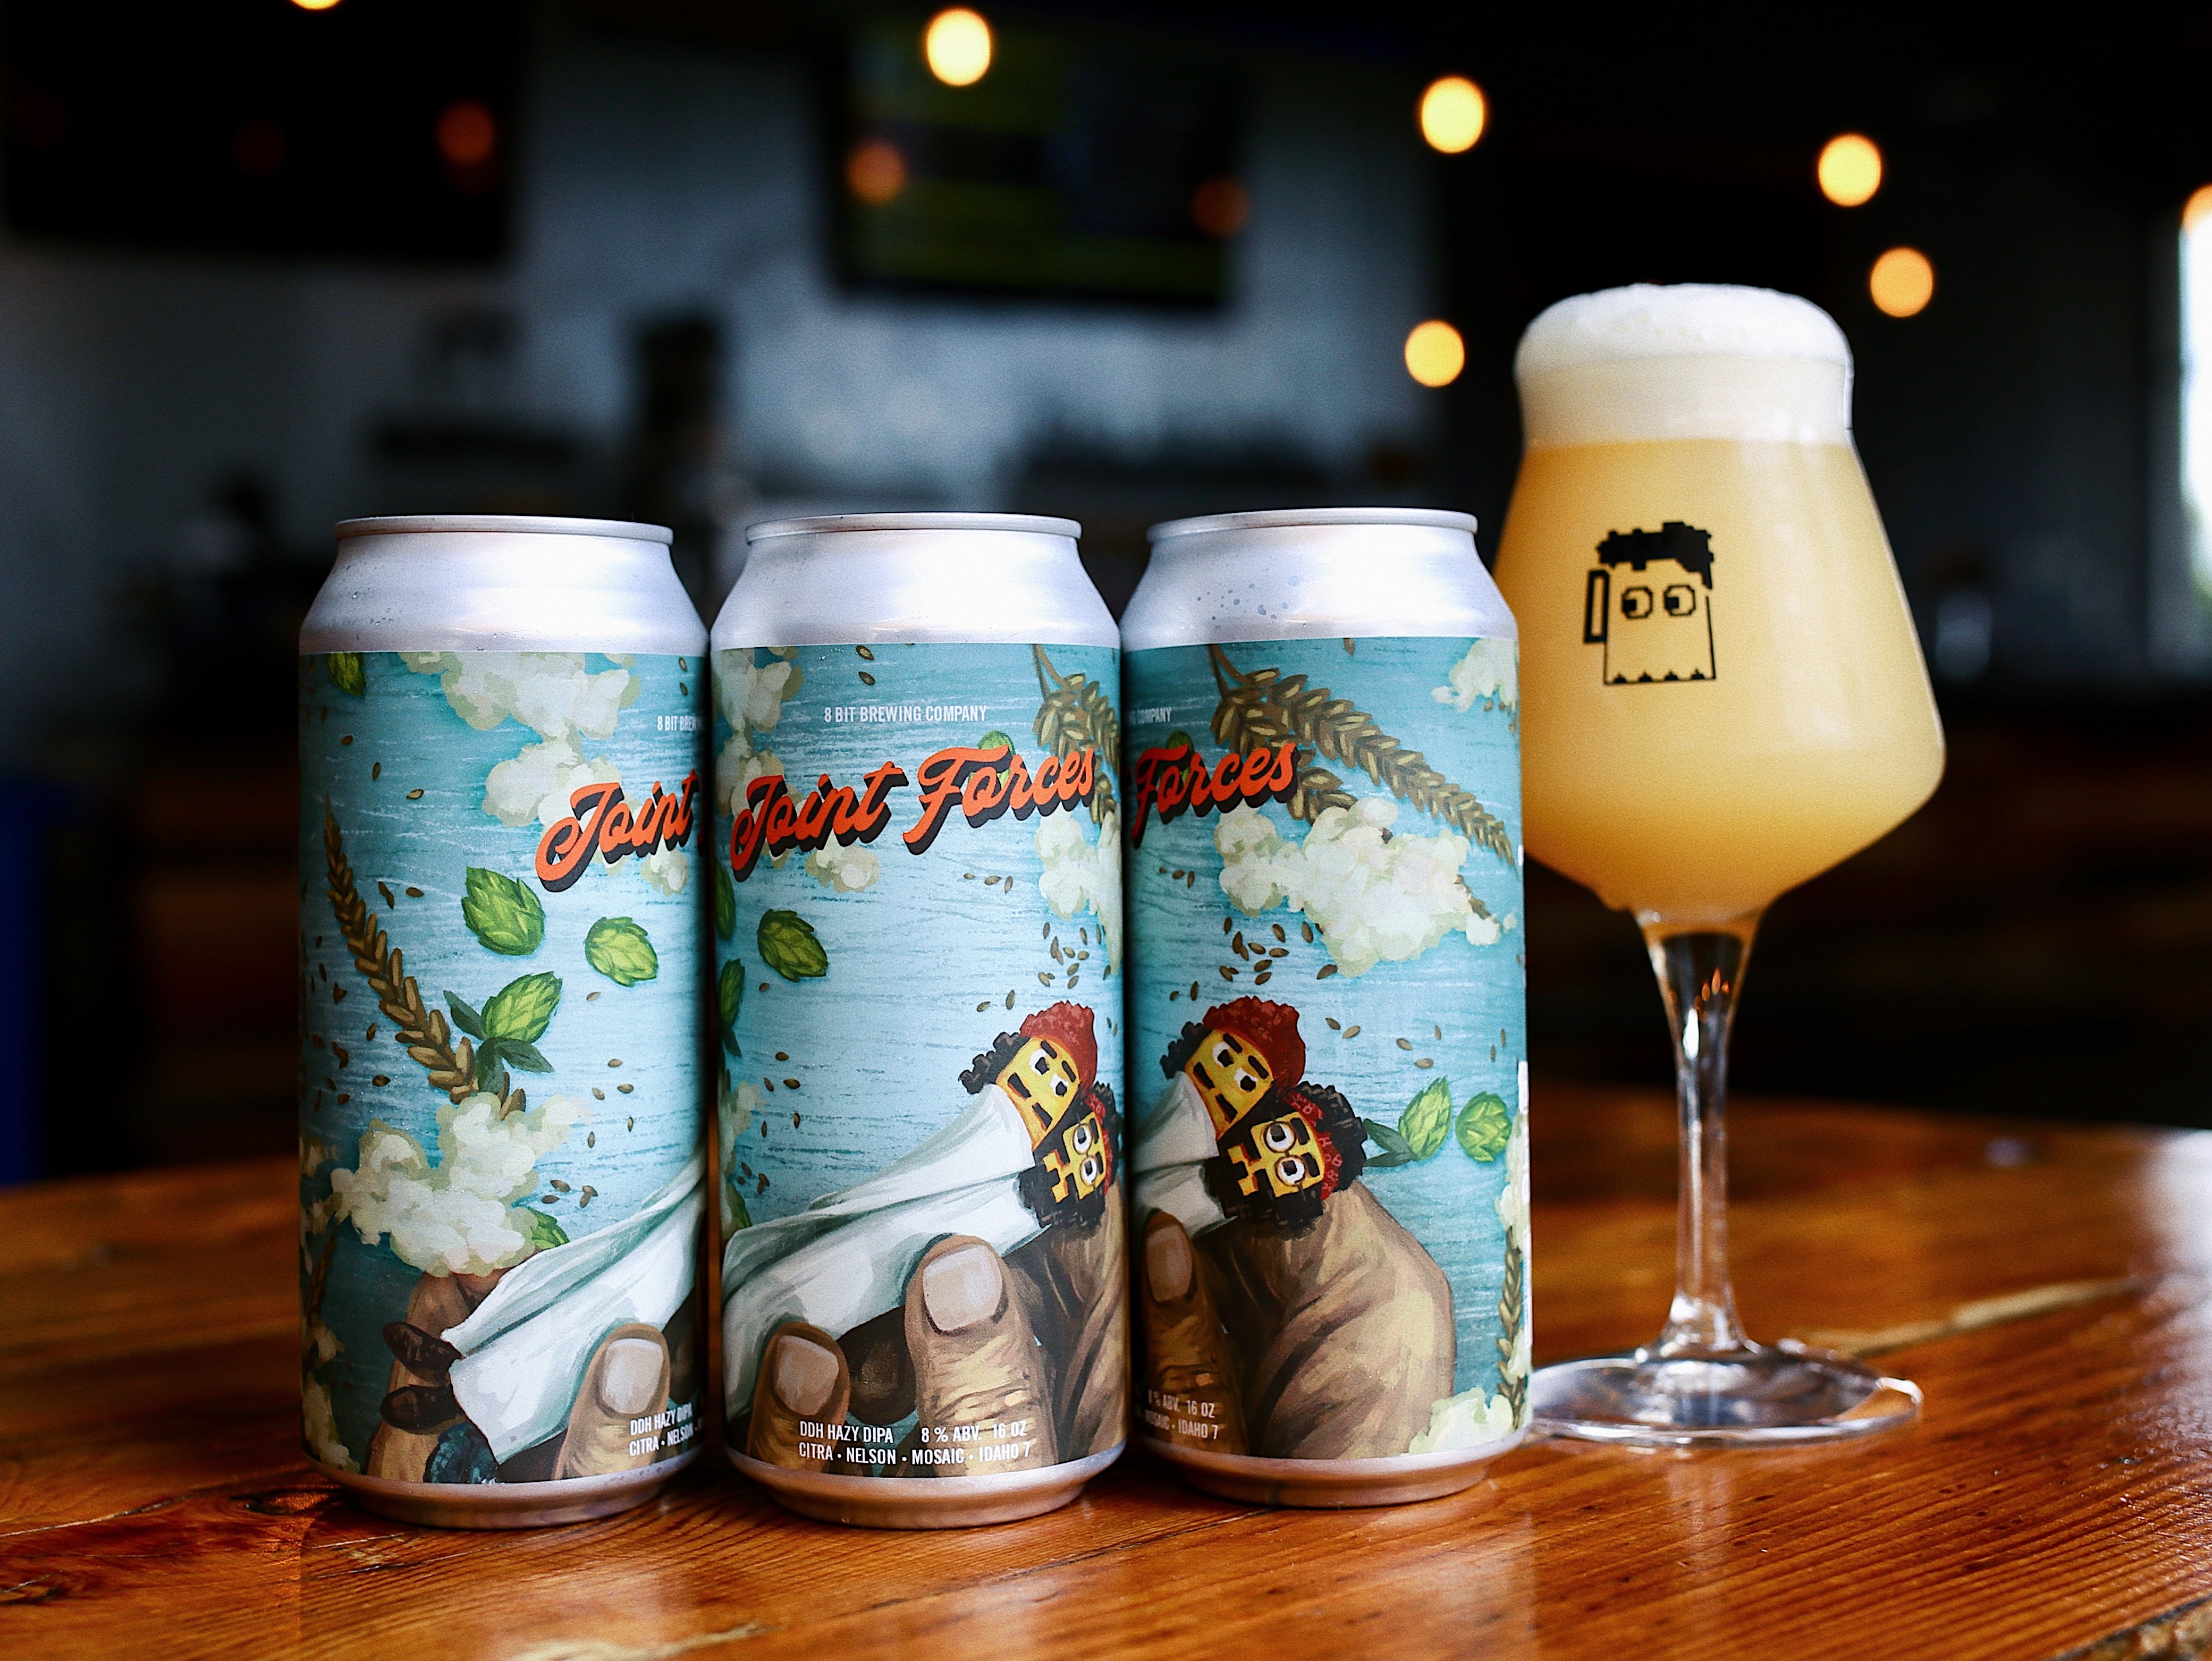 "Joint Forces" Hazy DIPA 4-pack (PICK UP ONLY)